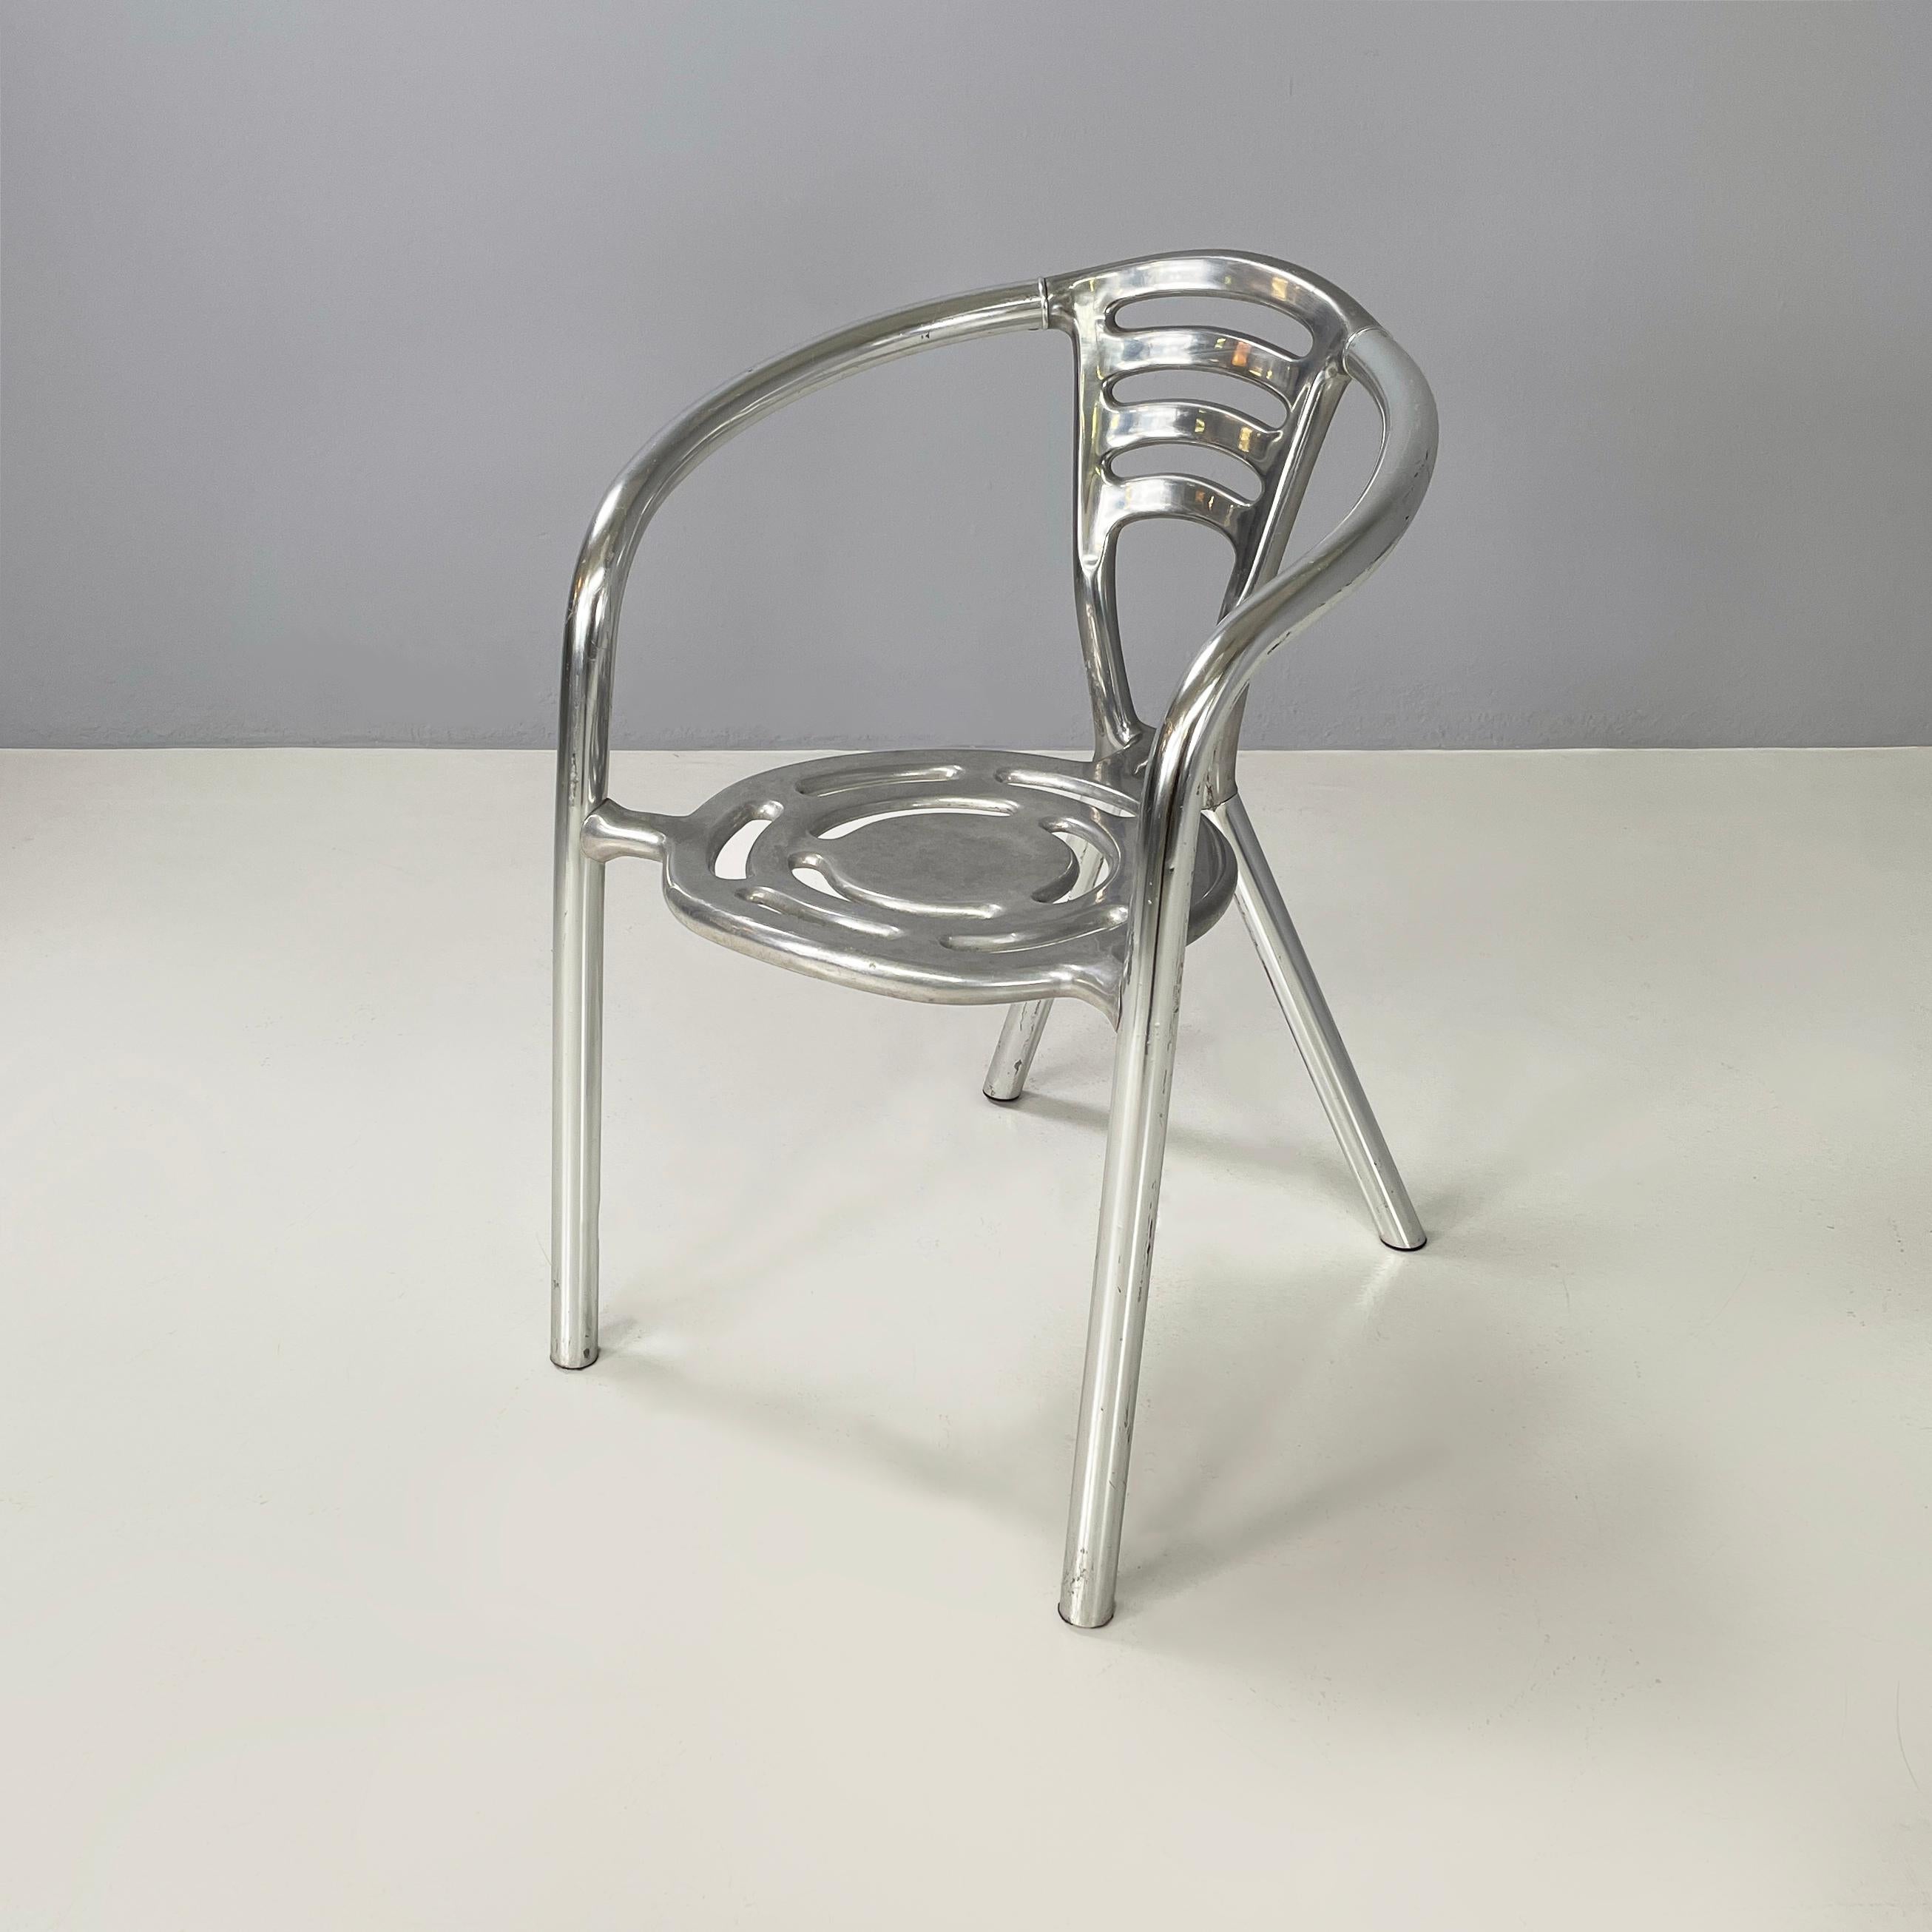 Italian modern Aluminum chairs Boulevard by Ferdinand Alexander Porsche for Ycami, 1990s
Set of 6 chairs mod. Boulevard with round seat, entirely in aluminium. The seat and backrest have decorative perforations with curved lines. The structure of